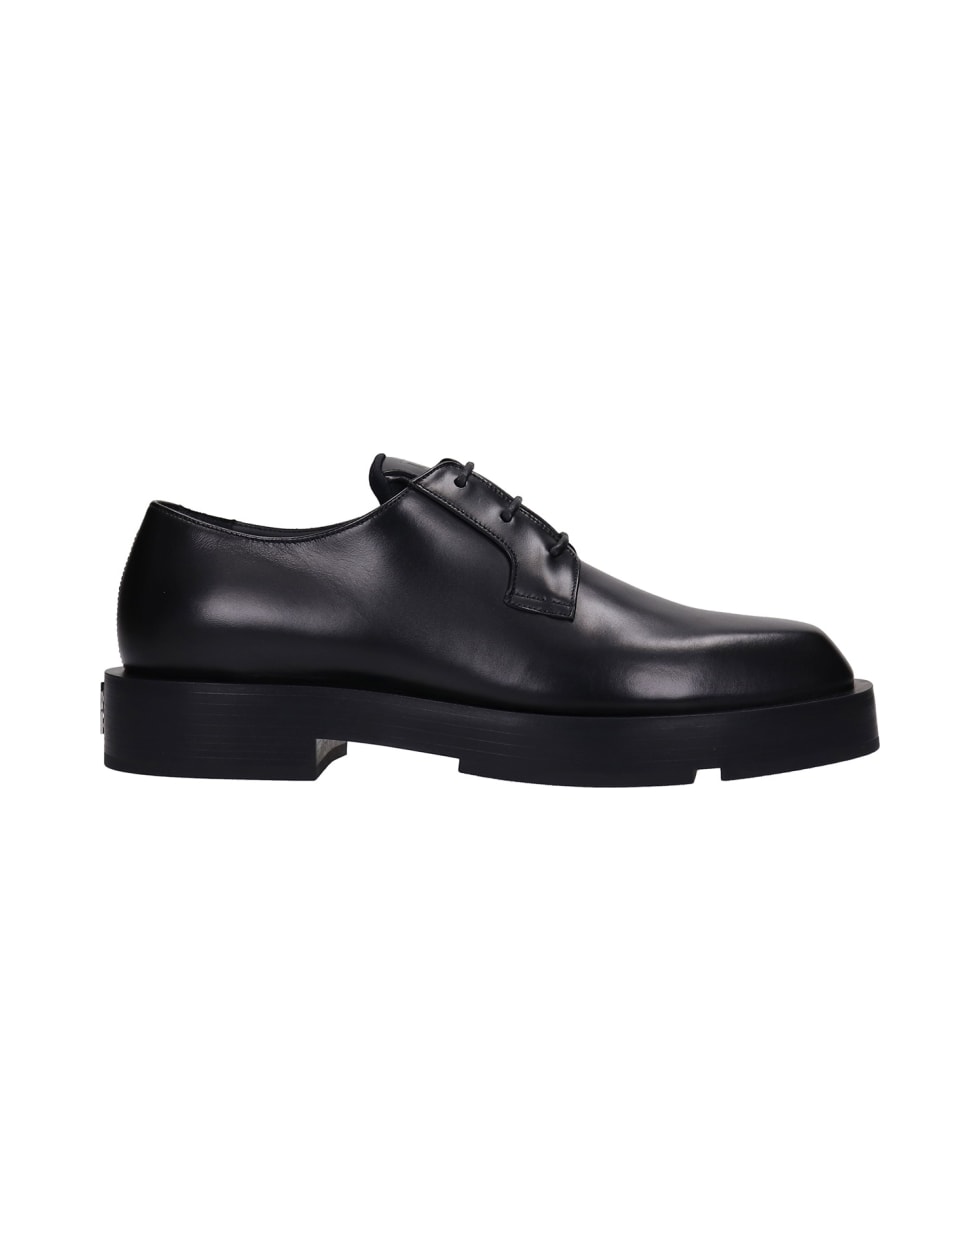 Givenchy Derby Squared Lace Up Shoes In Black Leather - Nero